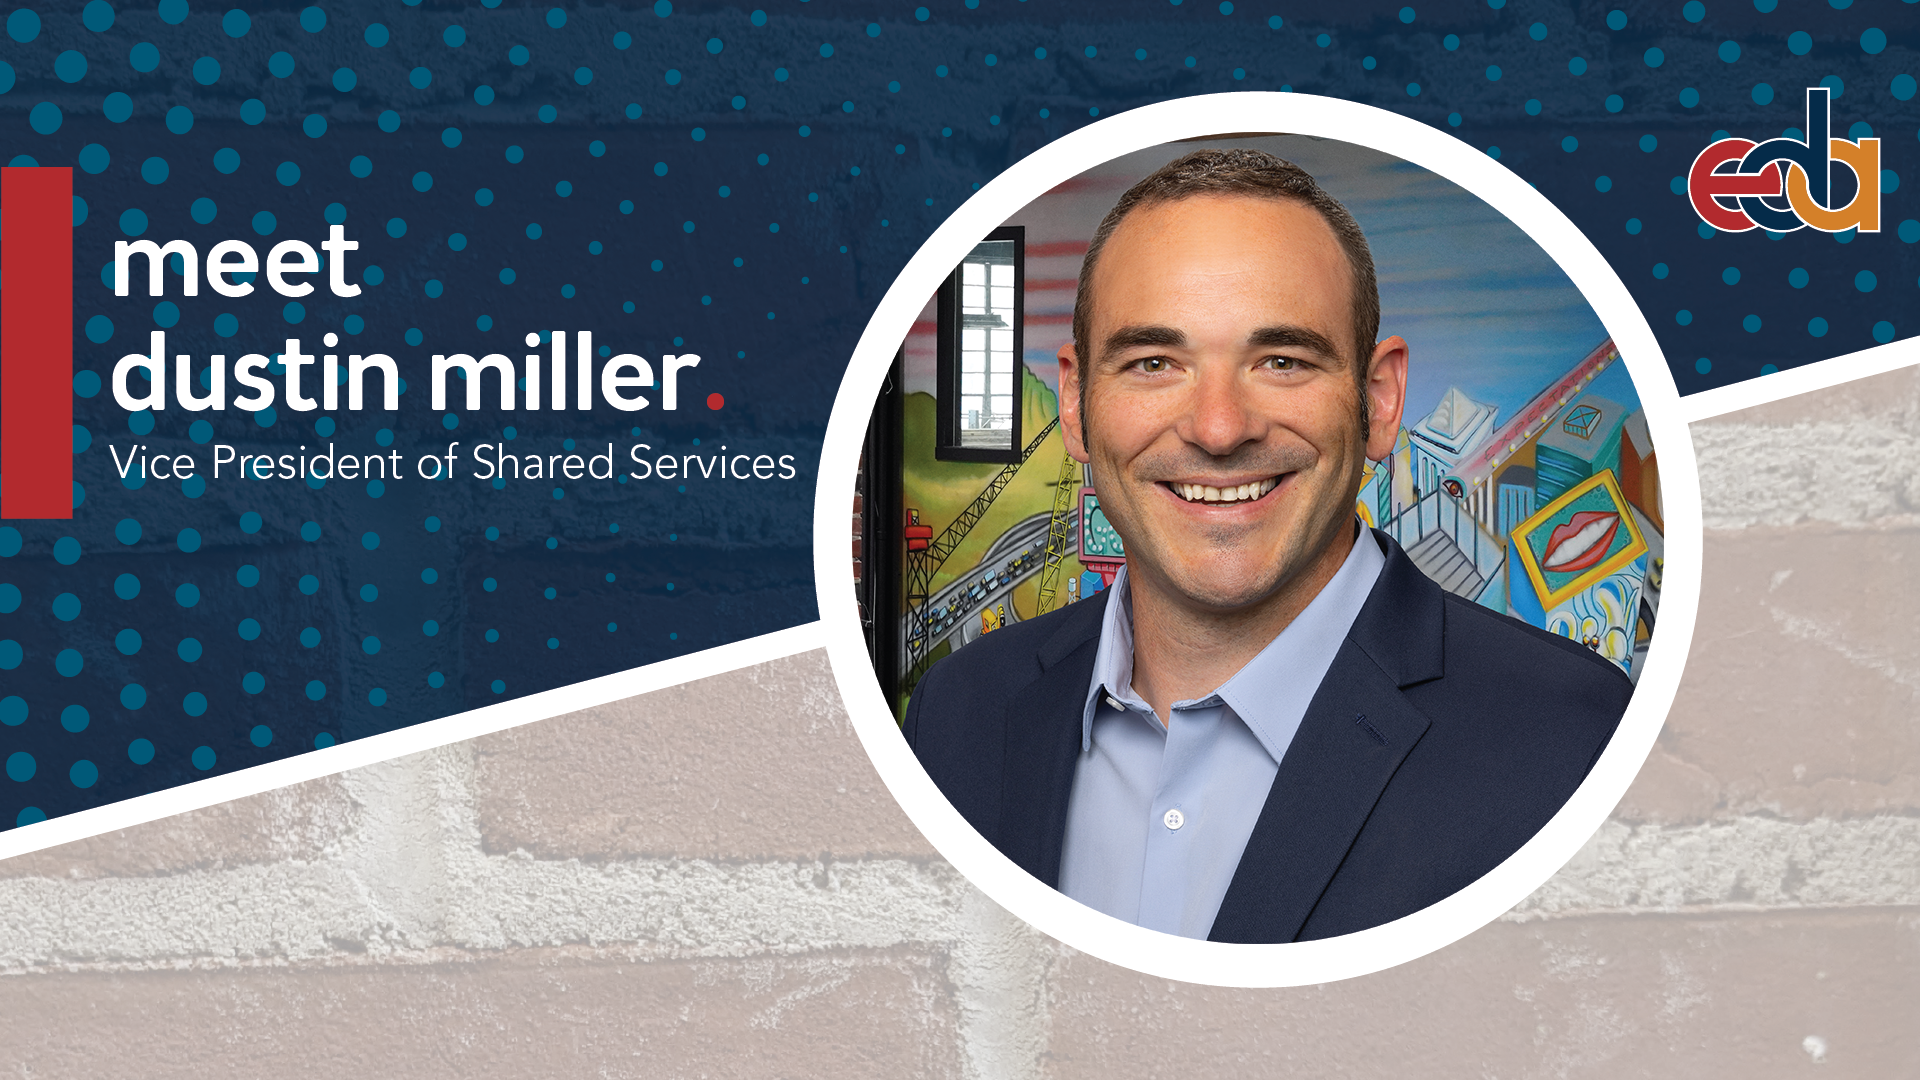 Dustin Miller - Vice President of Shared Services